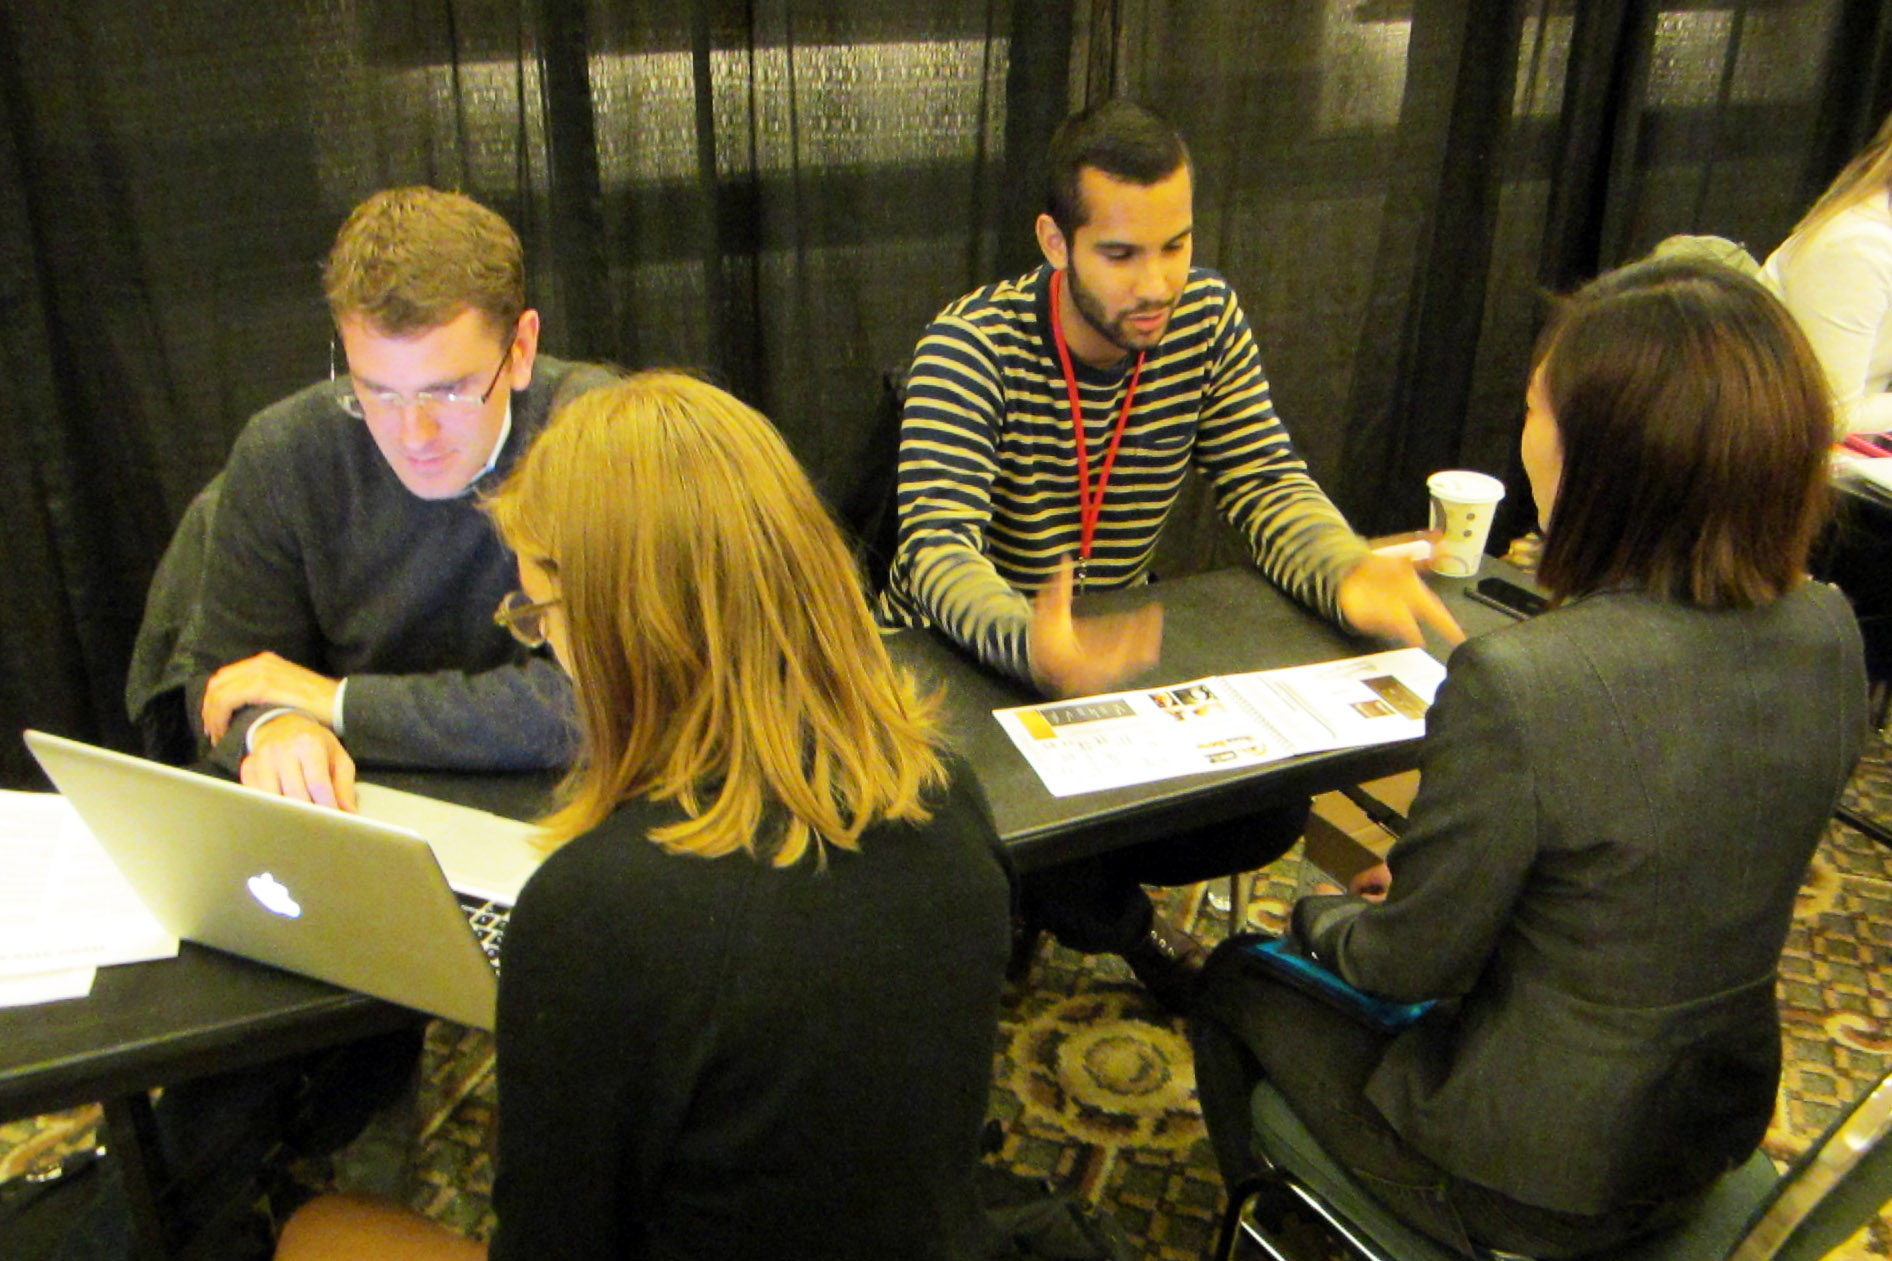 A photo of four people seated at a table looking at a computer and papers